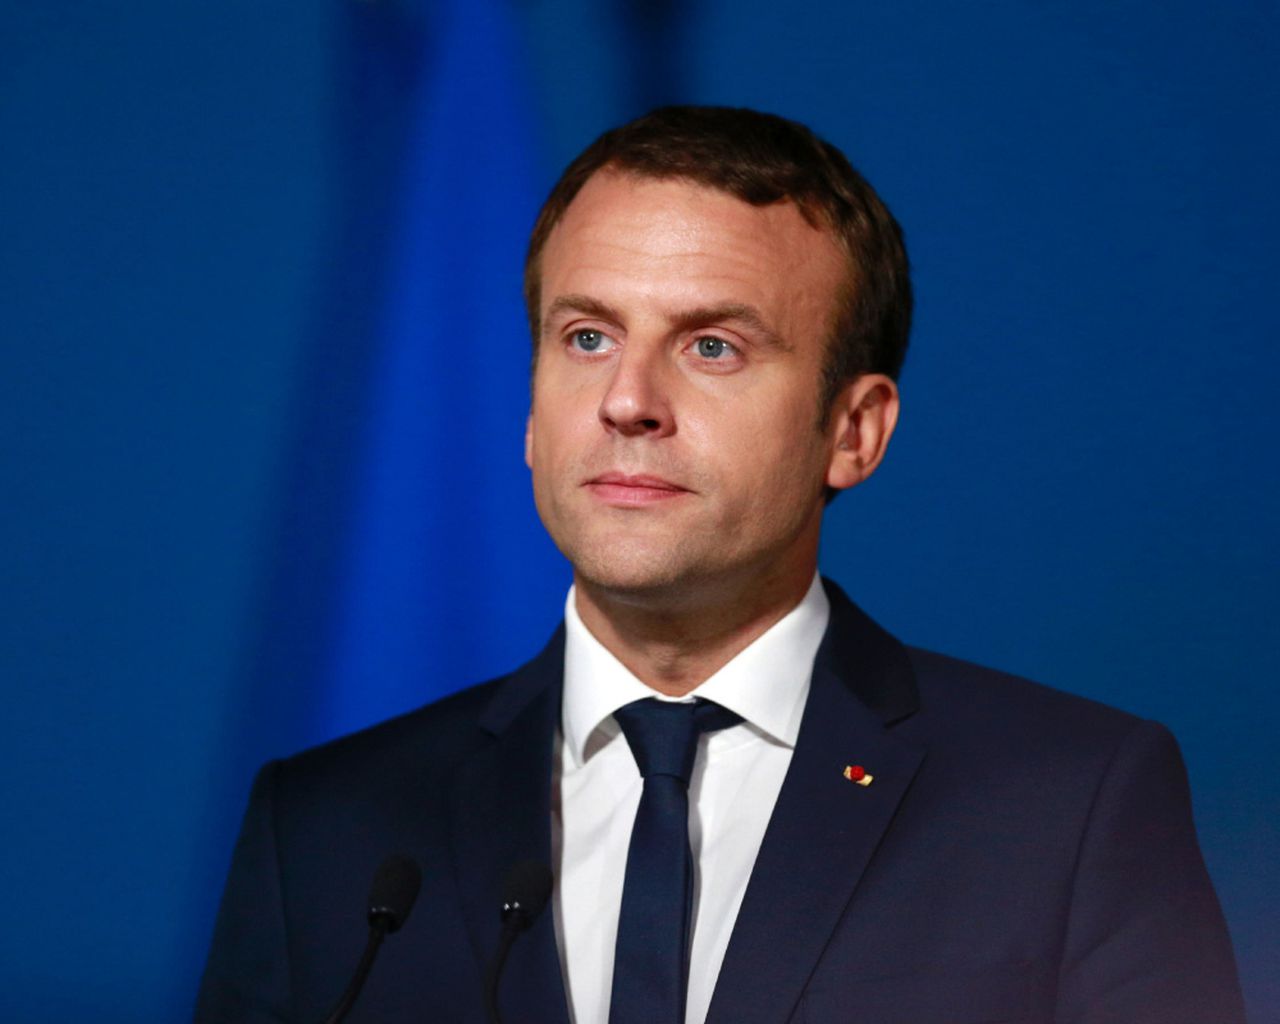 French President Emmanuel Macron spends $000 on makeup in just 3 months